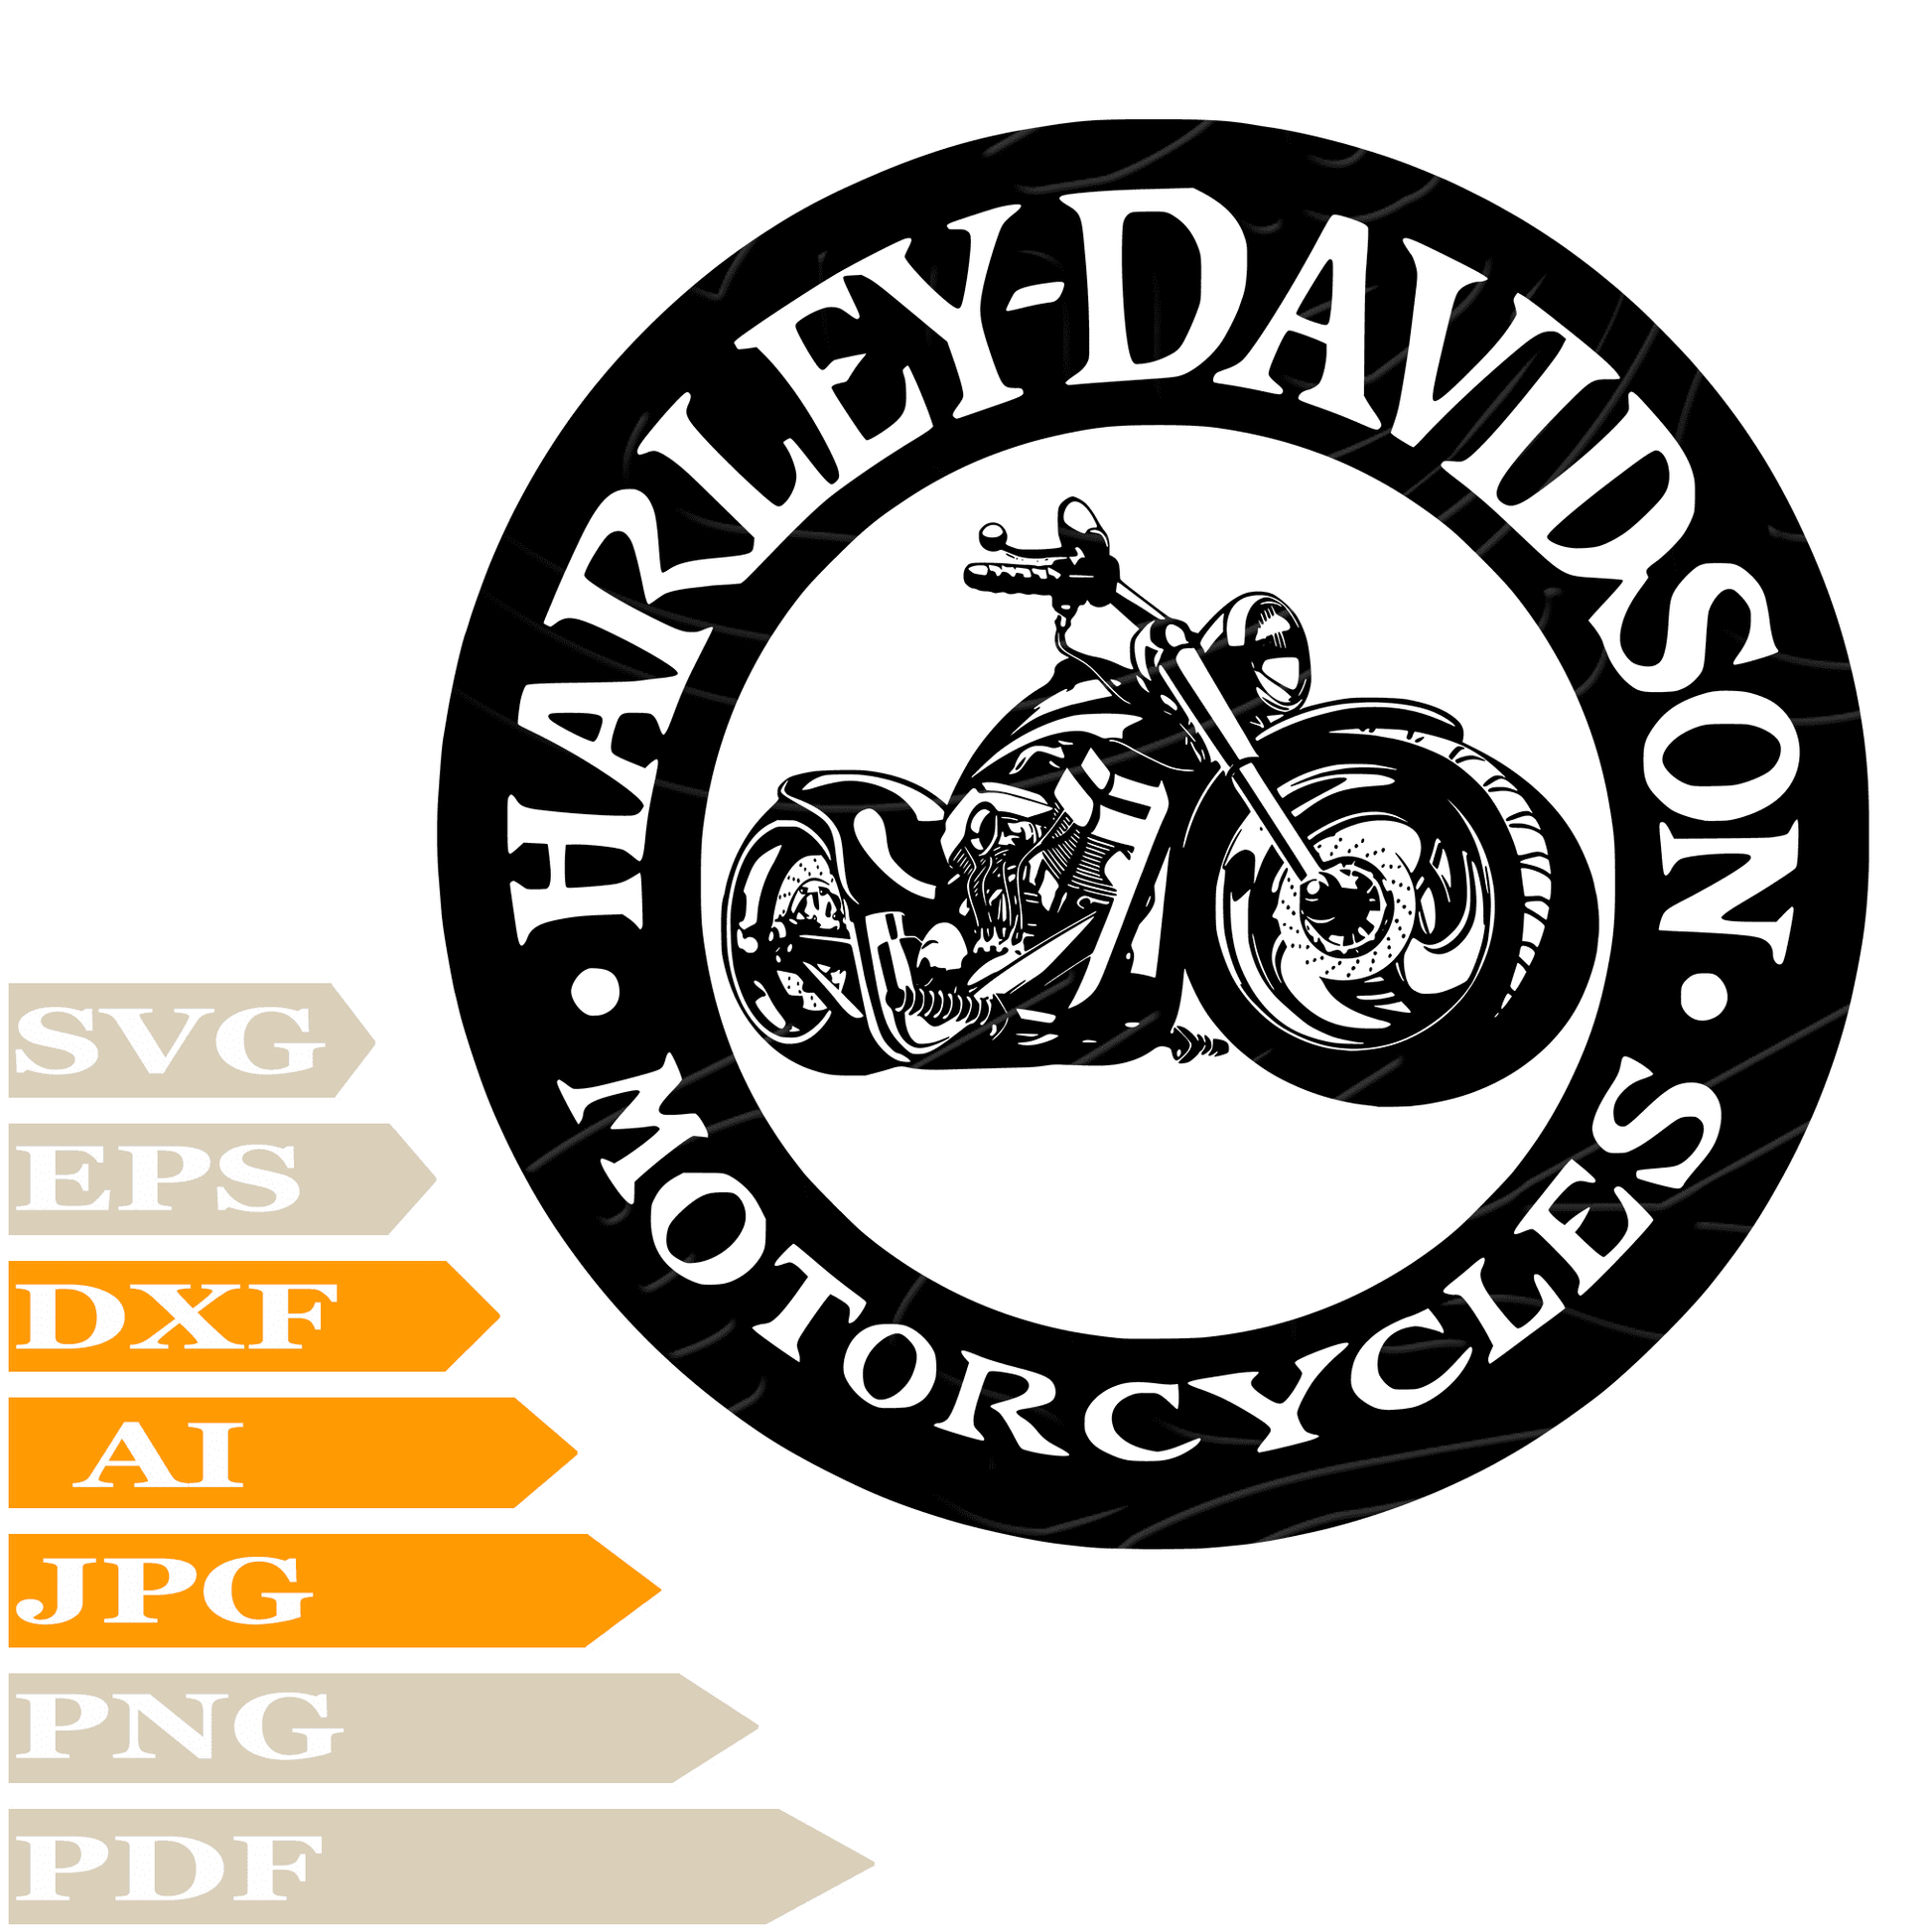 Sofvintage-Motorcycles-Motorcycles SVG-Harley Davidson Logo SVG Design-Motorcycles Harley Davidson Logo SVG File-Motorcycles Harley Davidson Digital Vector Download-Motorcycles Harley Davidson PNG-Harley Davidson Logo For Cricut-Harley Davidson Clip art-Harley Davidson Cut File-motorcycles T-Shirt-Motorcycles Wall Sticker-Motorcycles Harley Davidson For Tattoo-Harley Davidson Printable-Motorcycles Harley Davidson Logo Silhouette